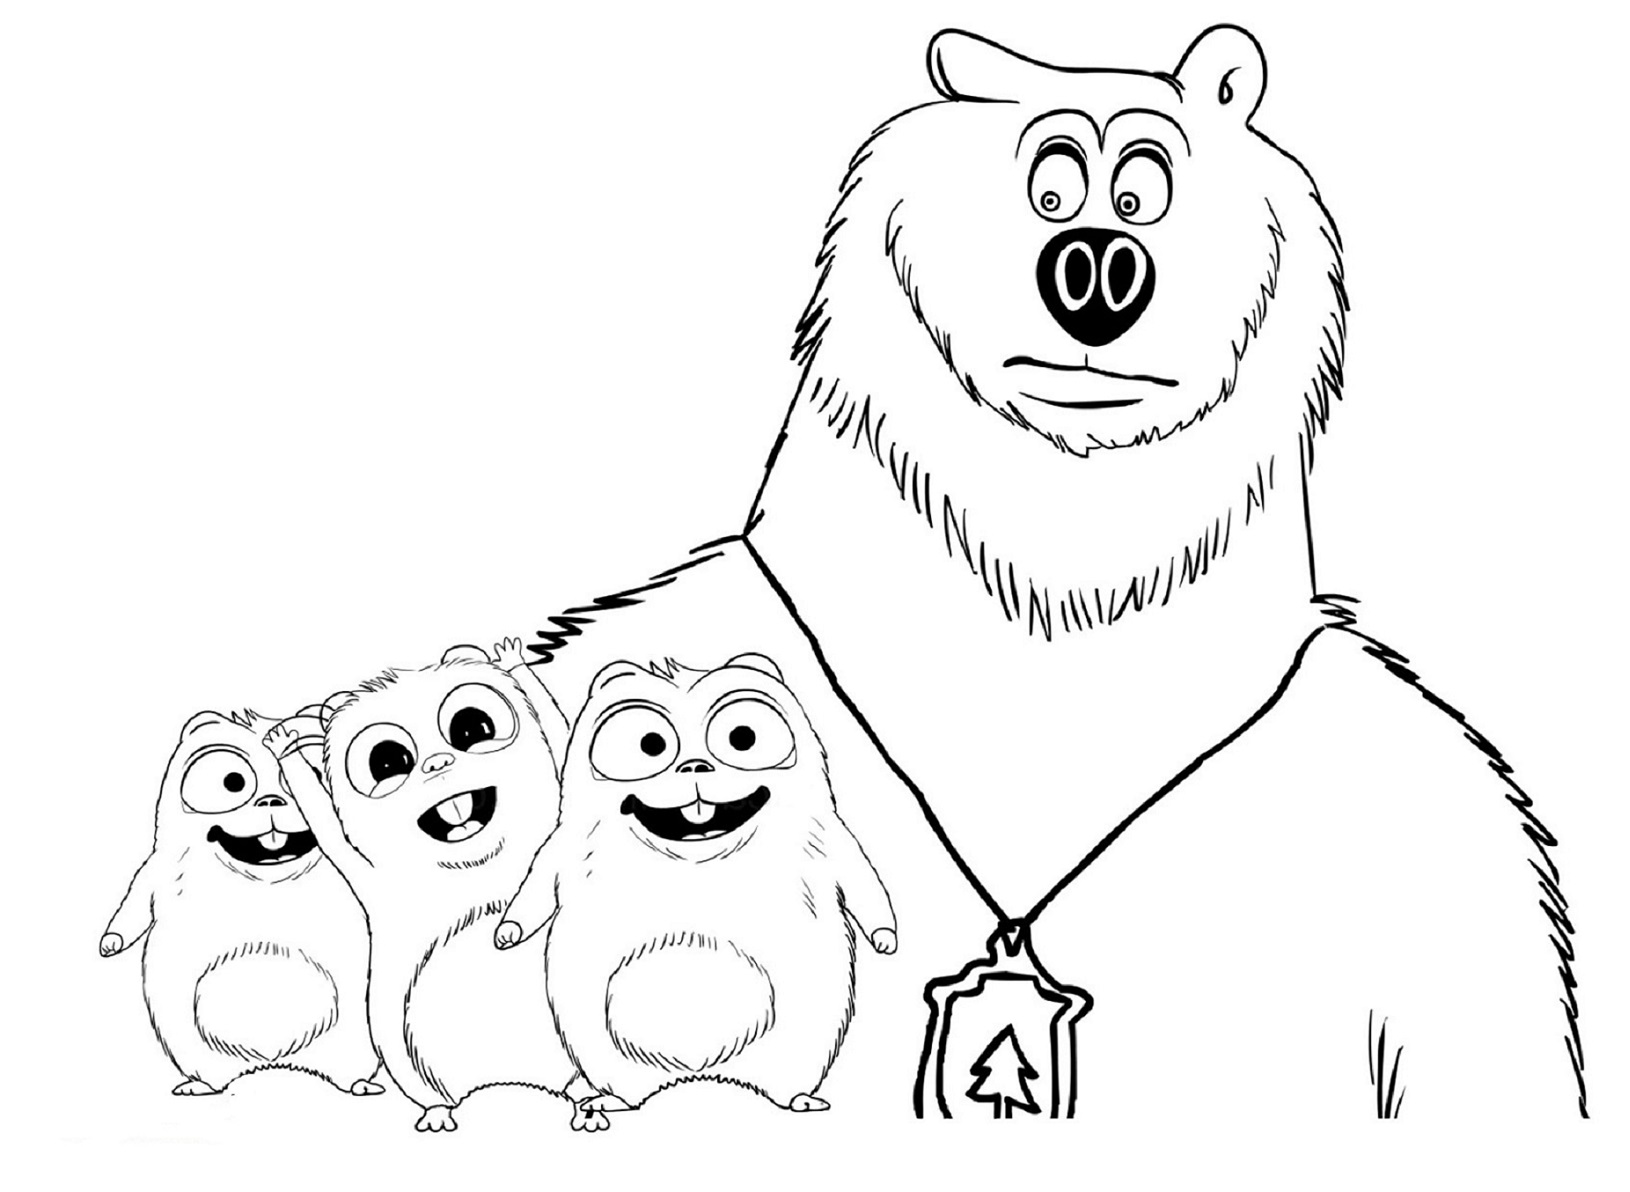 Grizzy Bear and Cute  Lemmings Coloring Page  for kids printable - SheetalColor.com